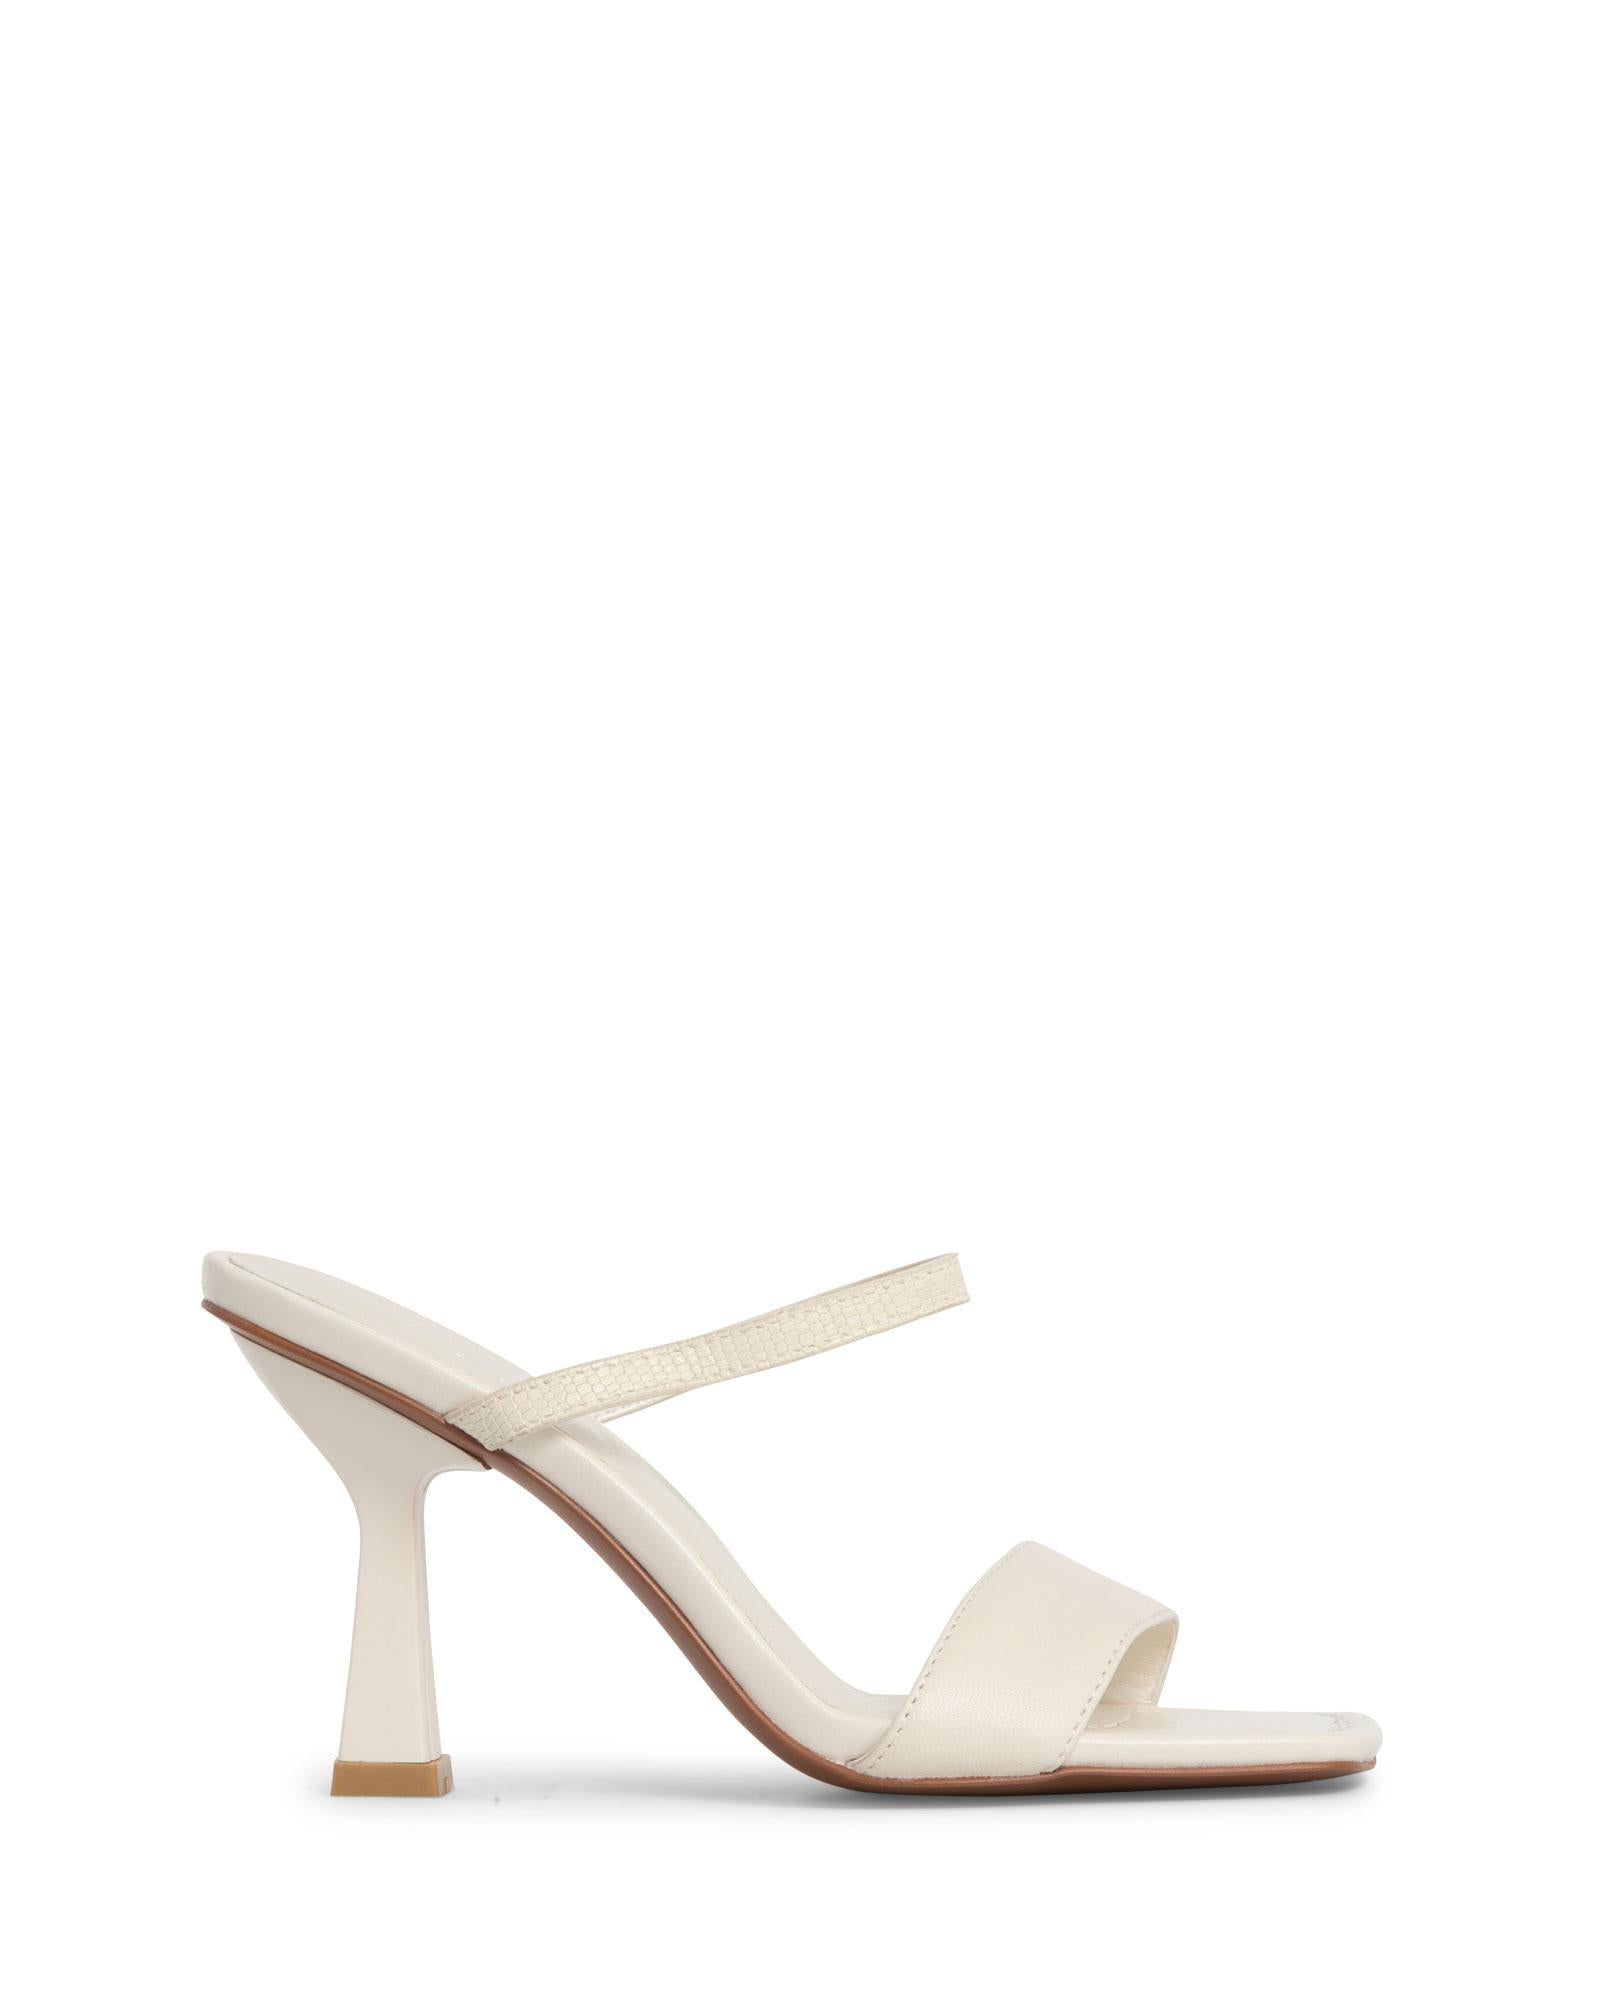 Brazil Oat 9cm Thin Heel with Elasticed Strap and a Square Toe